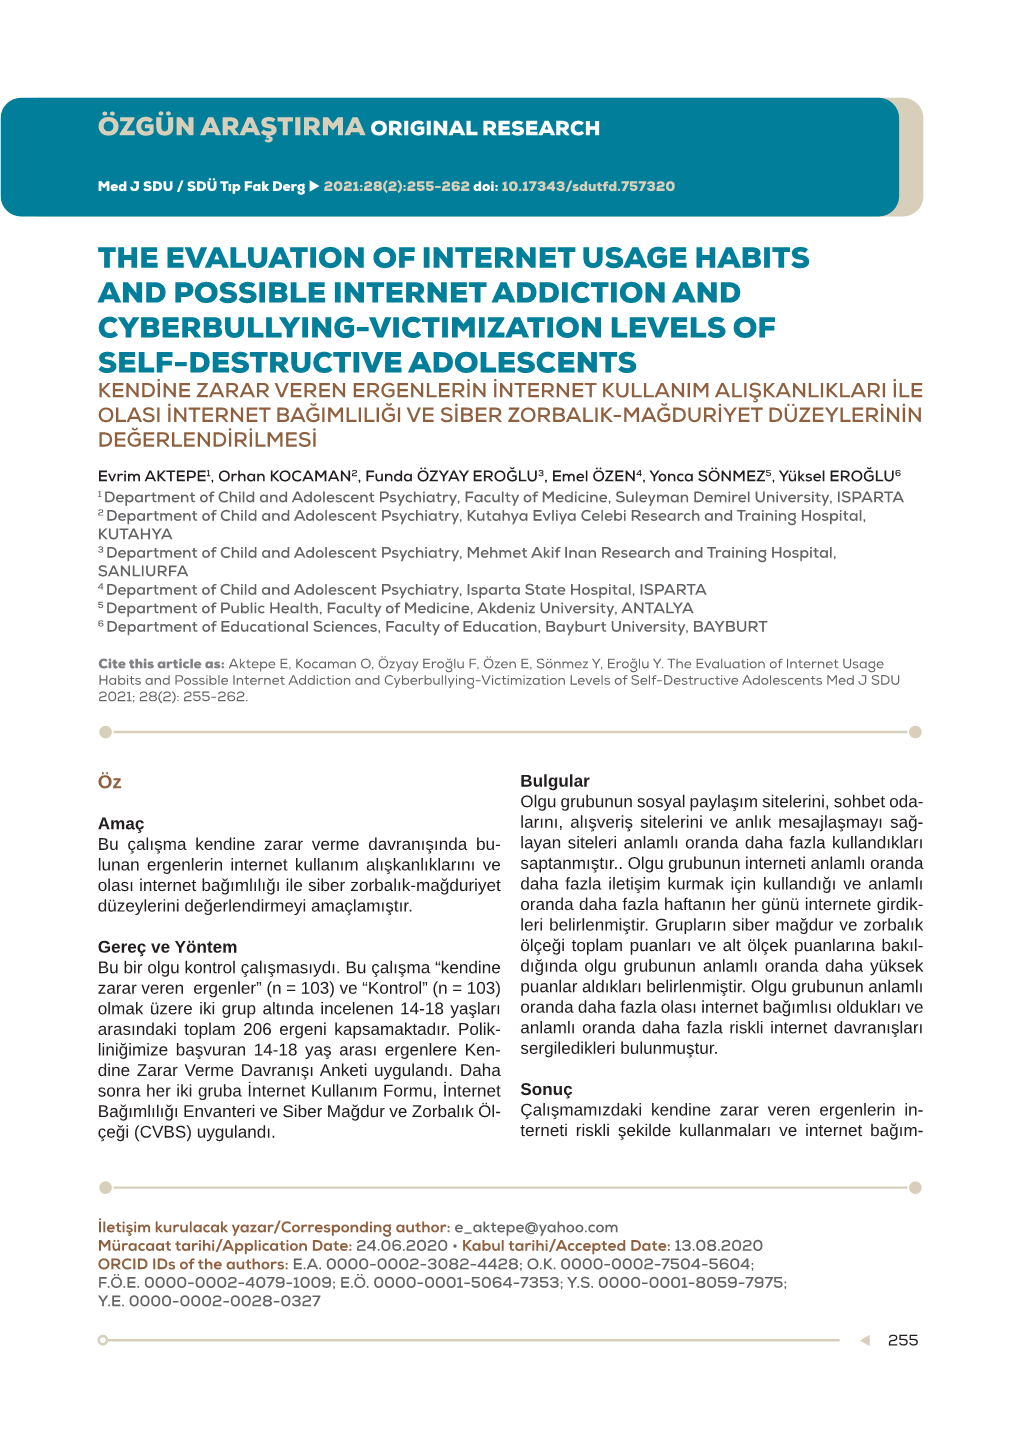 The Evaluation of Internet Usage Habits and Possible